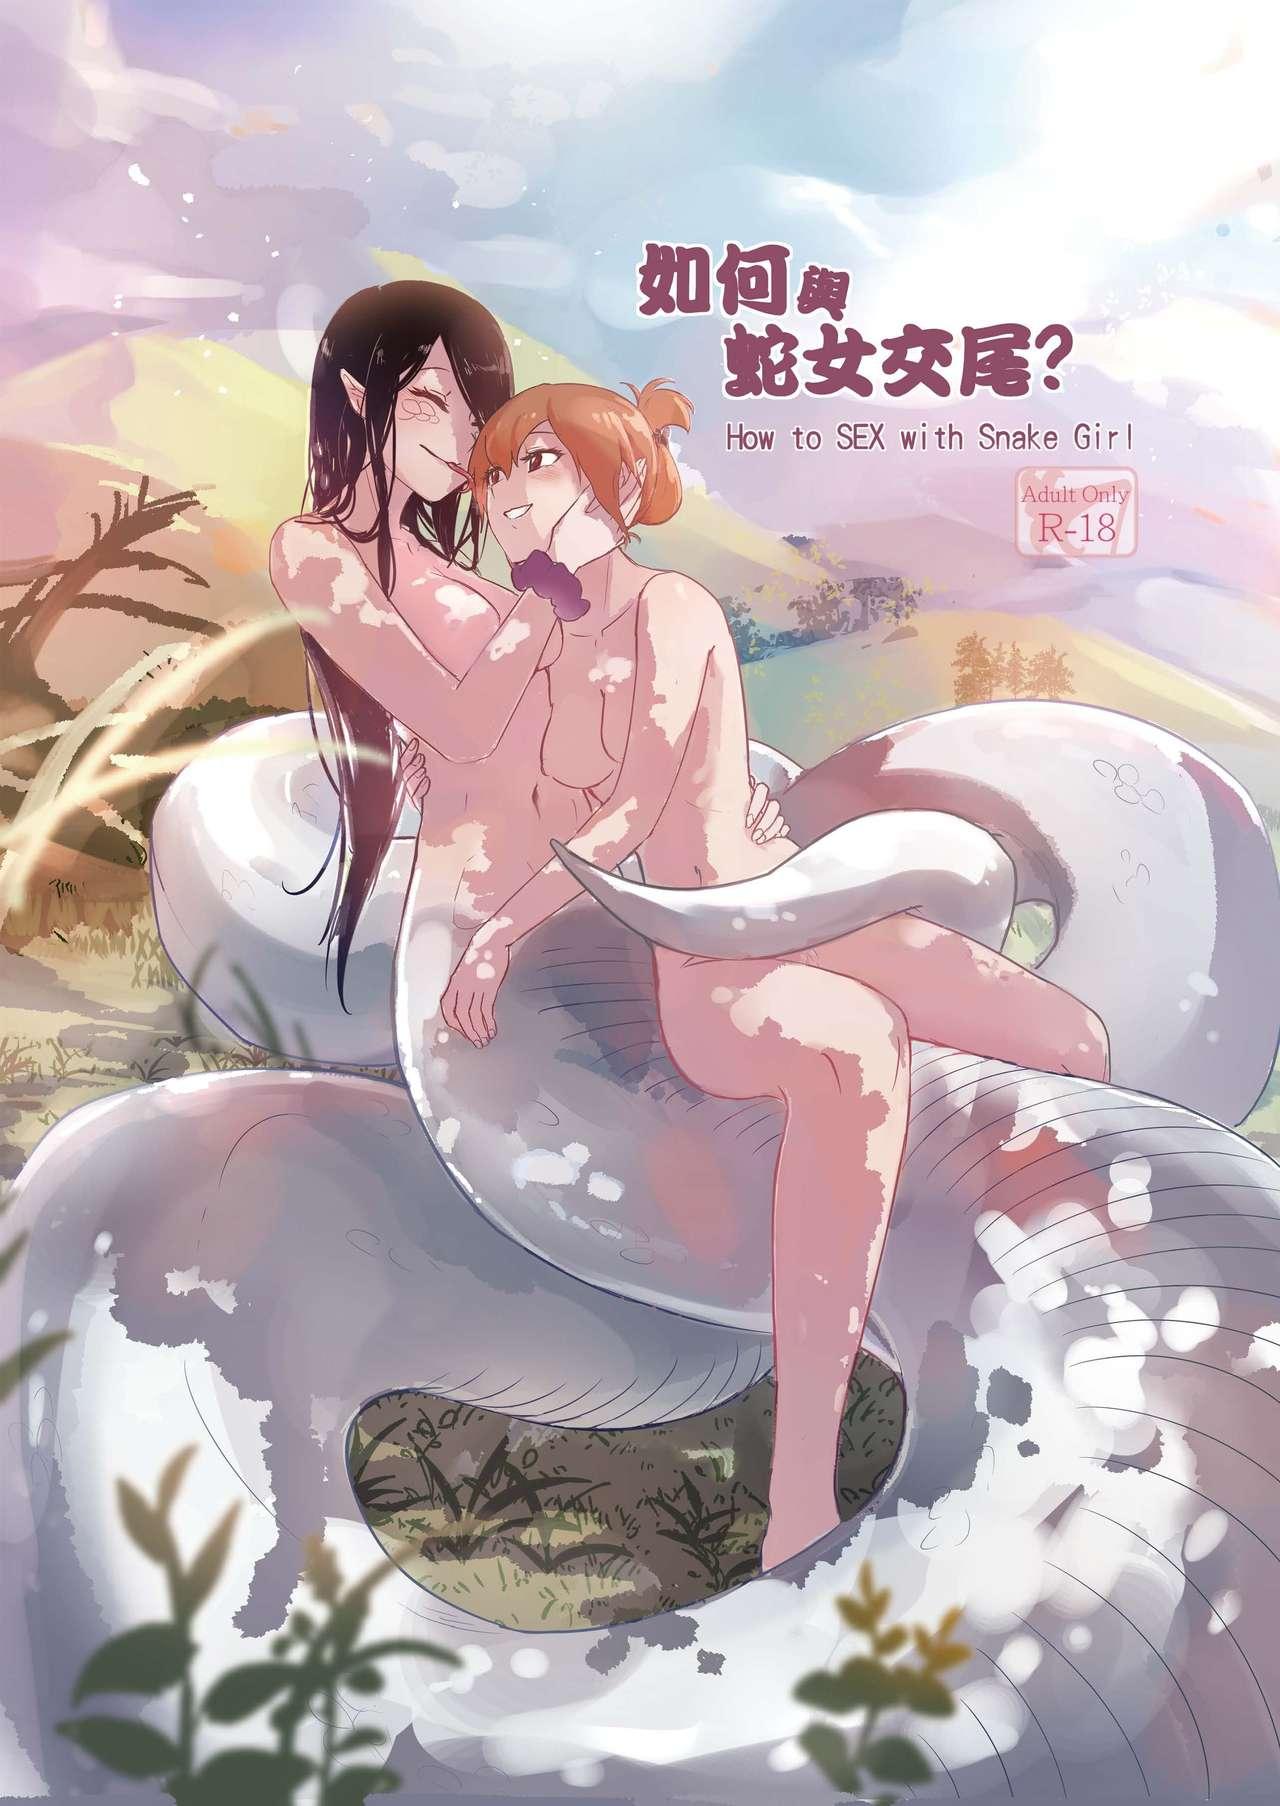 Mms How to Sex with Snake Girl | 如何與蛇女交尾 | 蛇女と交尾する方法は - Original Audition - Picture 1